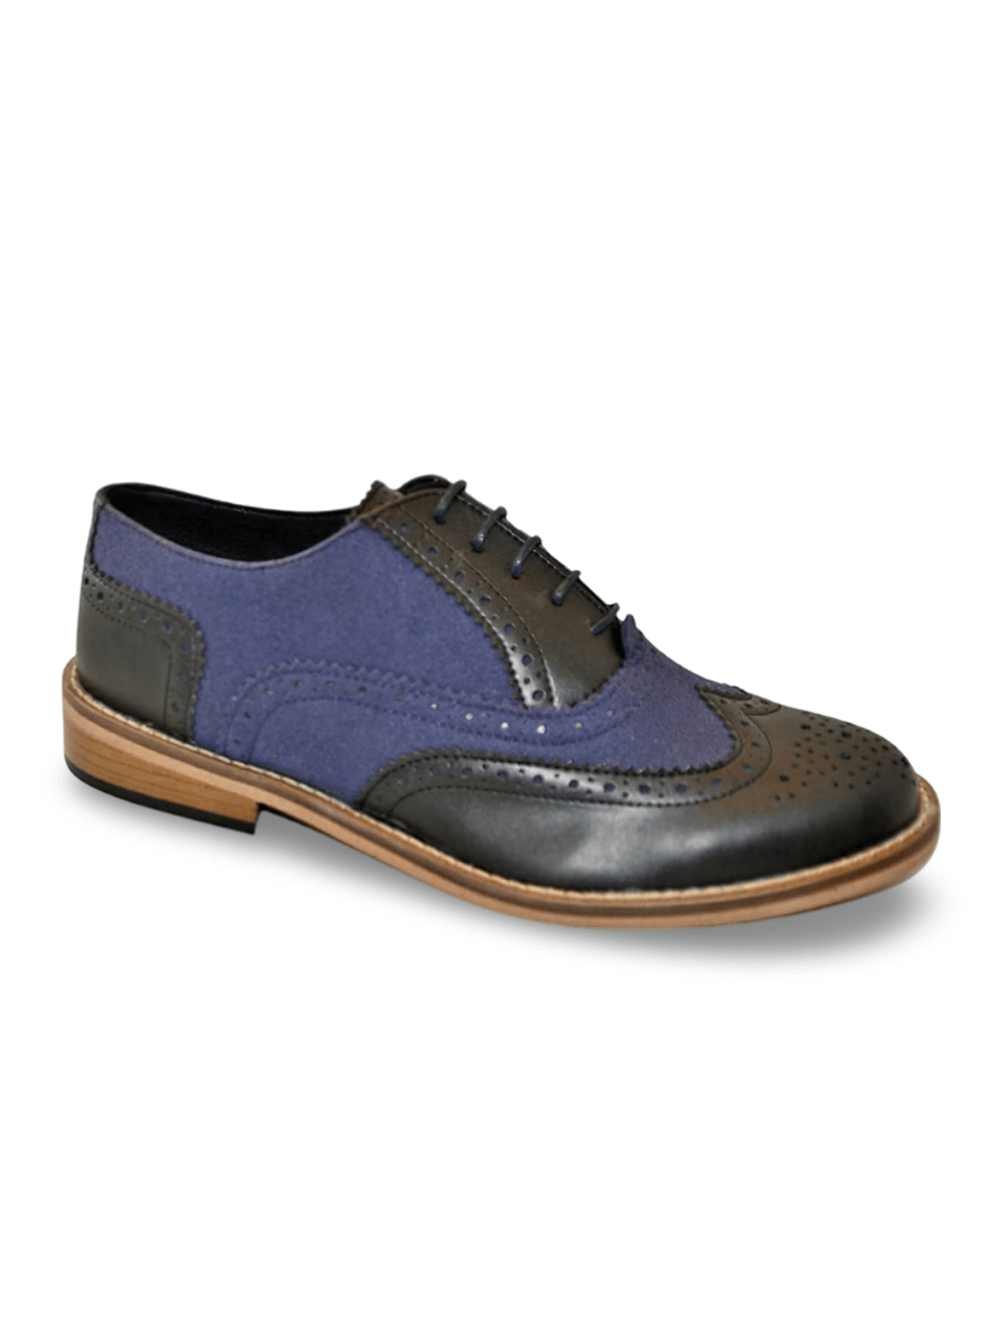 Black And Blue Vegan Derby Shoes With Lace-Up